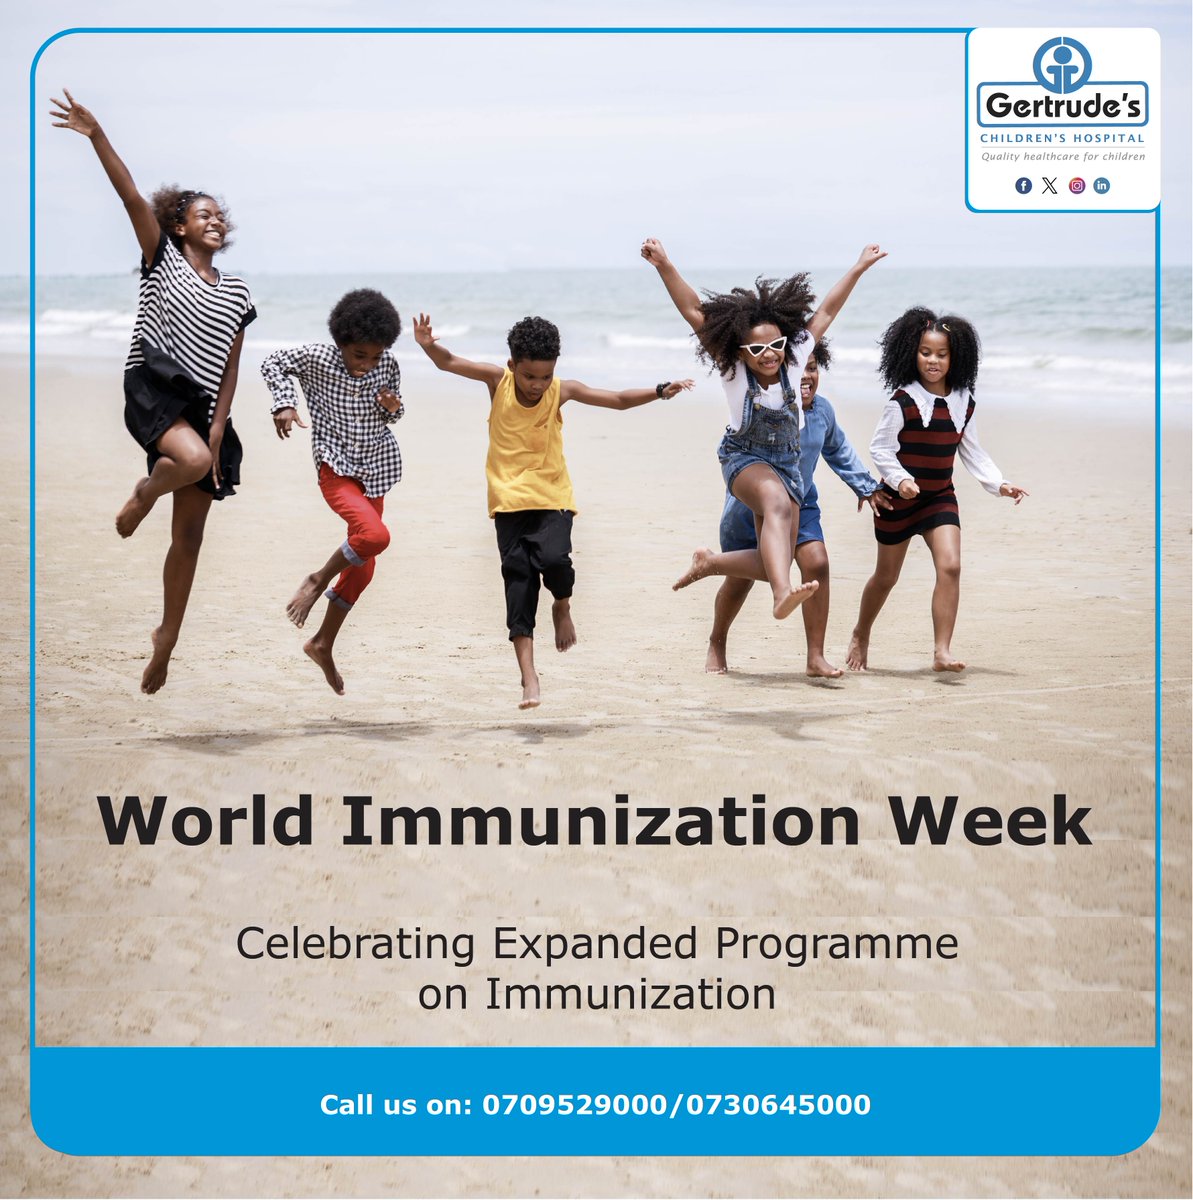 World Immunization Week is the time to celebrate how our Expanded Programme on Immunization gives every child access to life-saving vaccines across our medical centres. Call 07095299000. #GertrudesKe #Immunization #ChildHealth #WIW2024.